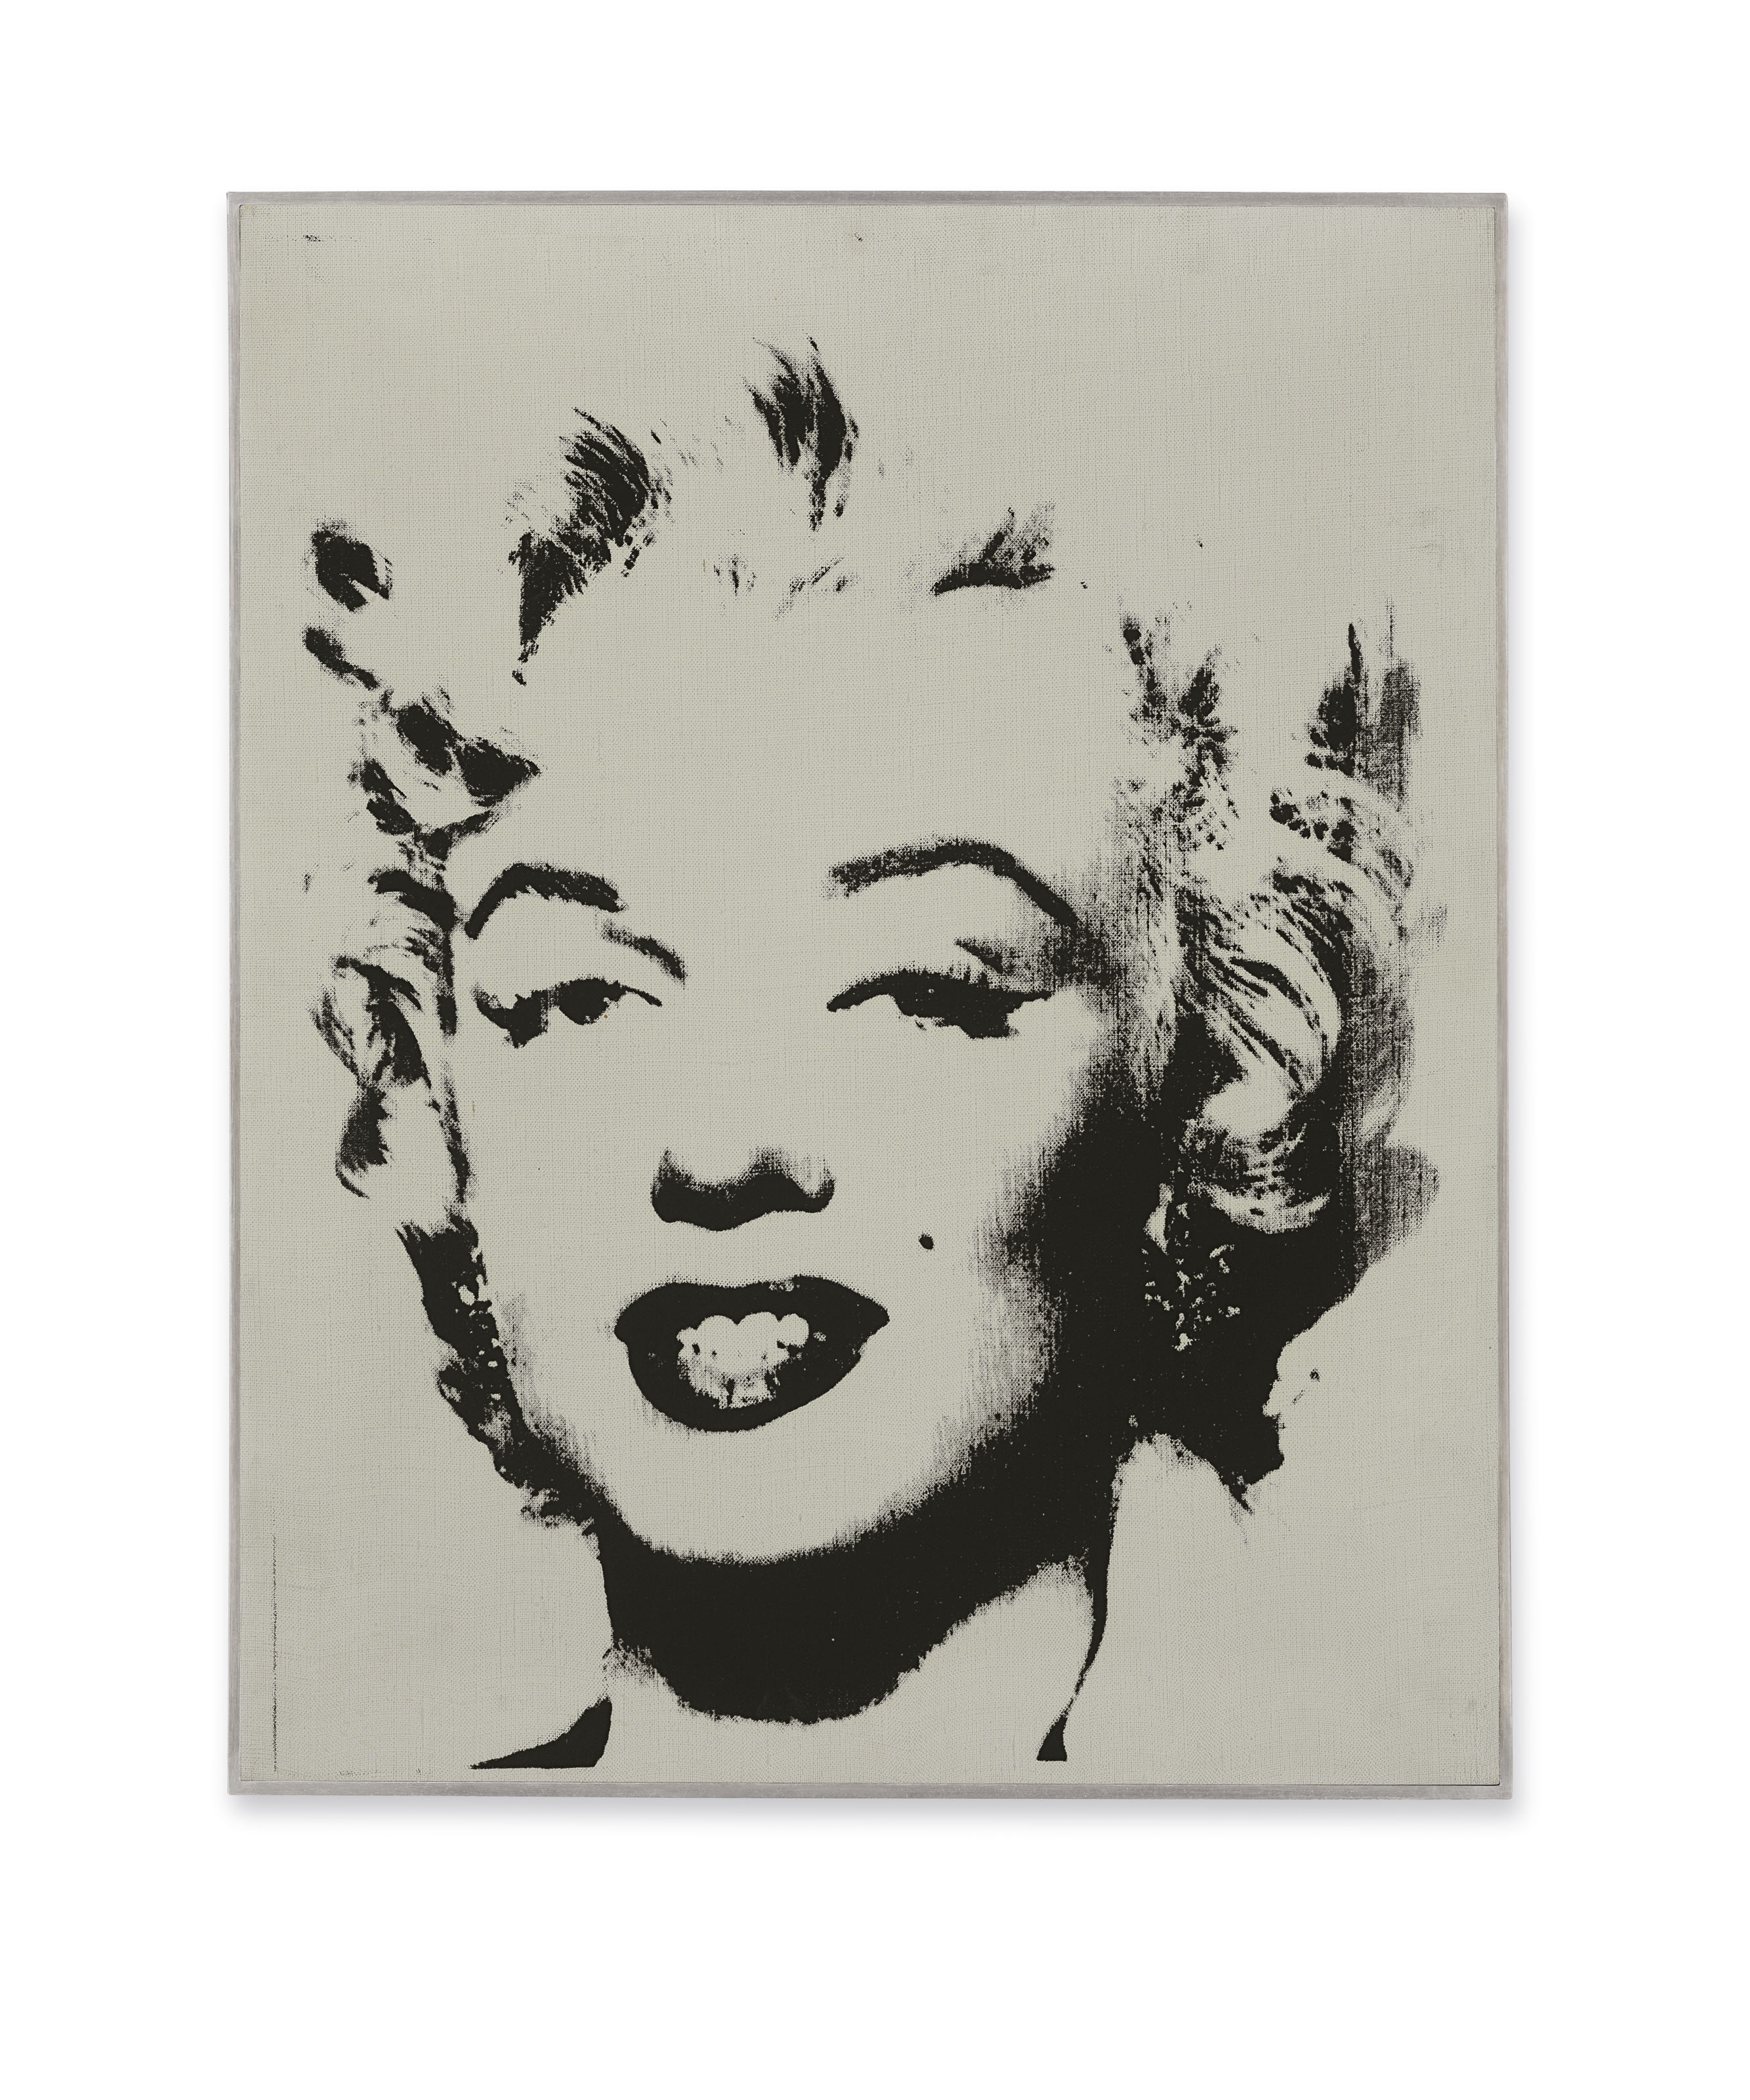 Why Did Andy Warhol Paint Marilyn Monroe